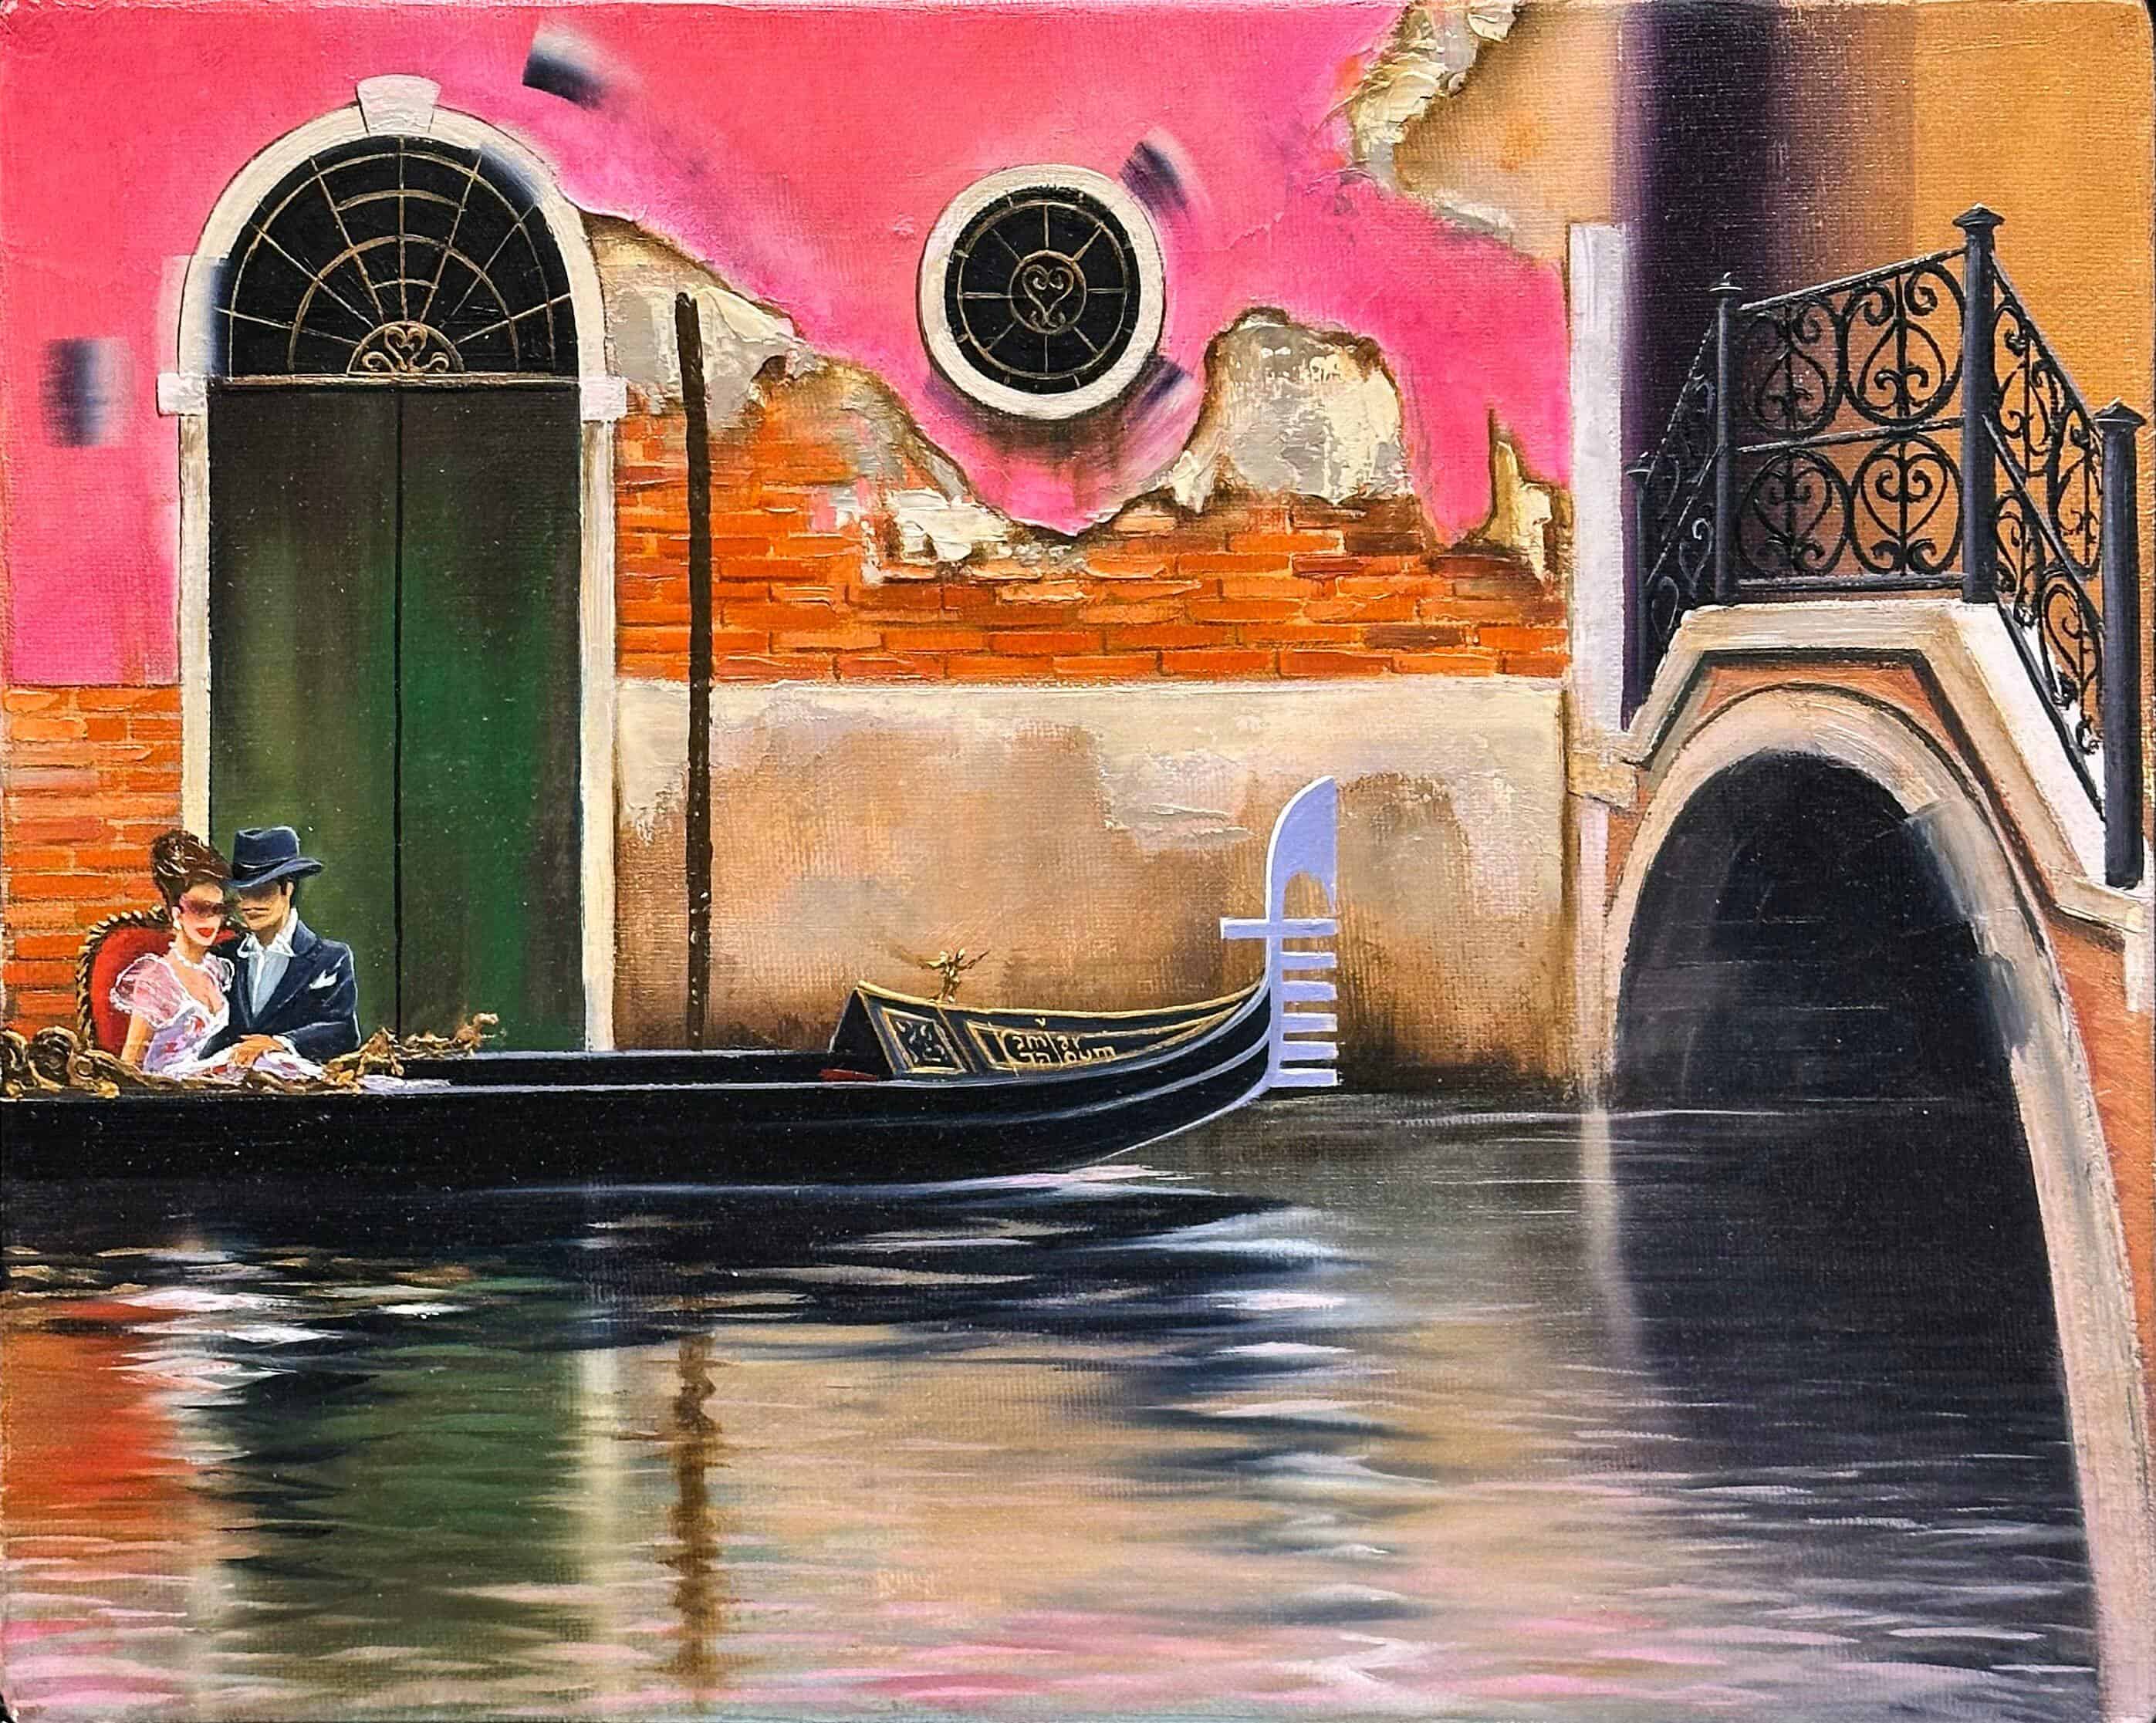 Contemporary Art. Title: Venice Sightseeing, Oil on Canvas, 9.5 x 12 in by Canadian Artist Kamiar Gajoum.